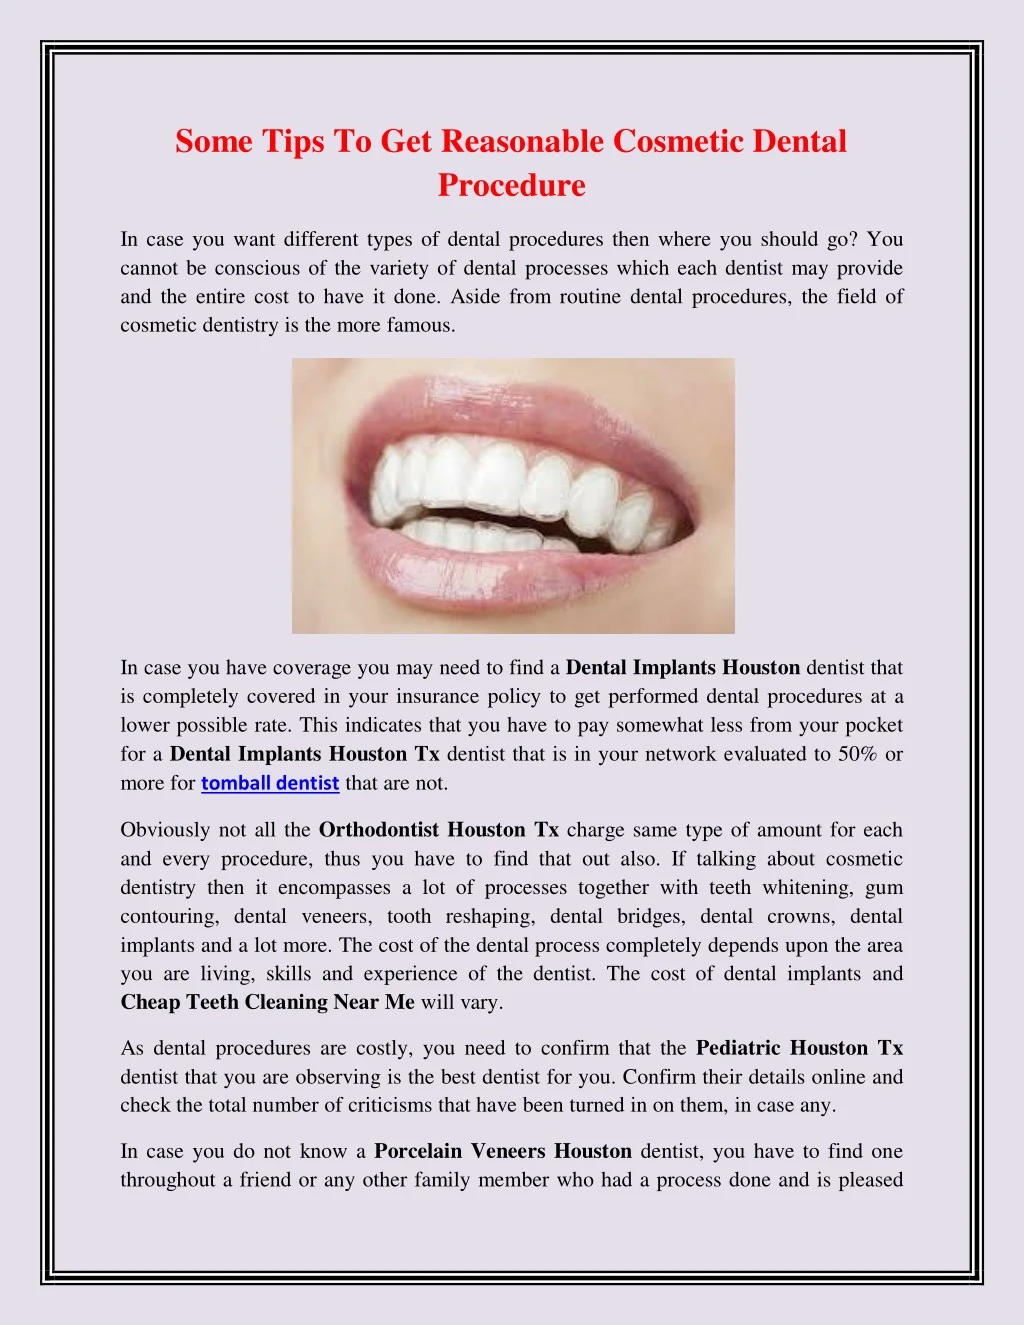 some tips to get reasonable cosmetic dental